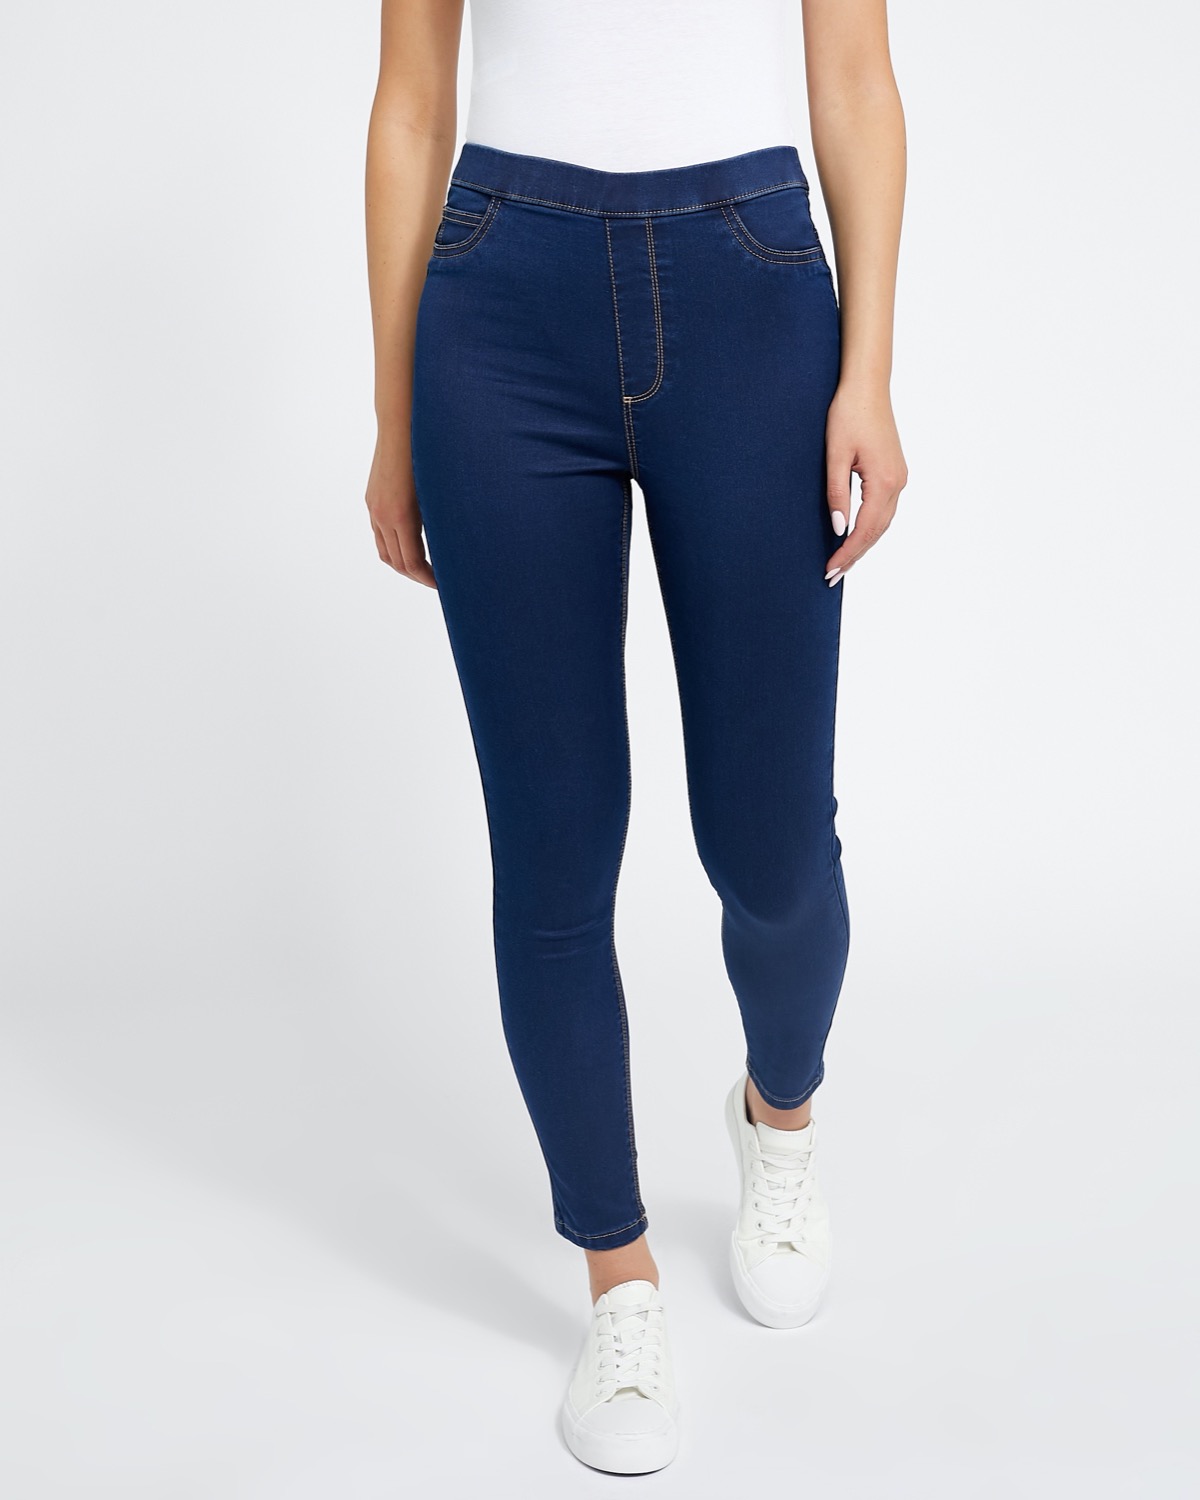 mom jeans for curvy girl